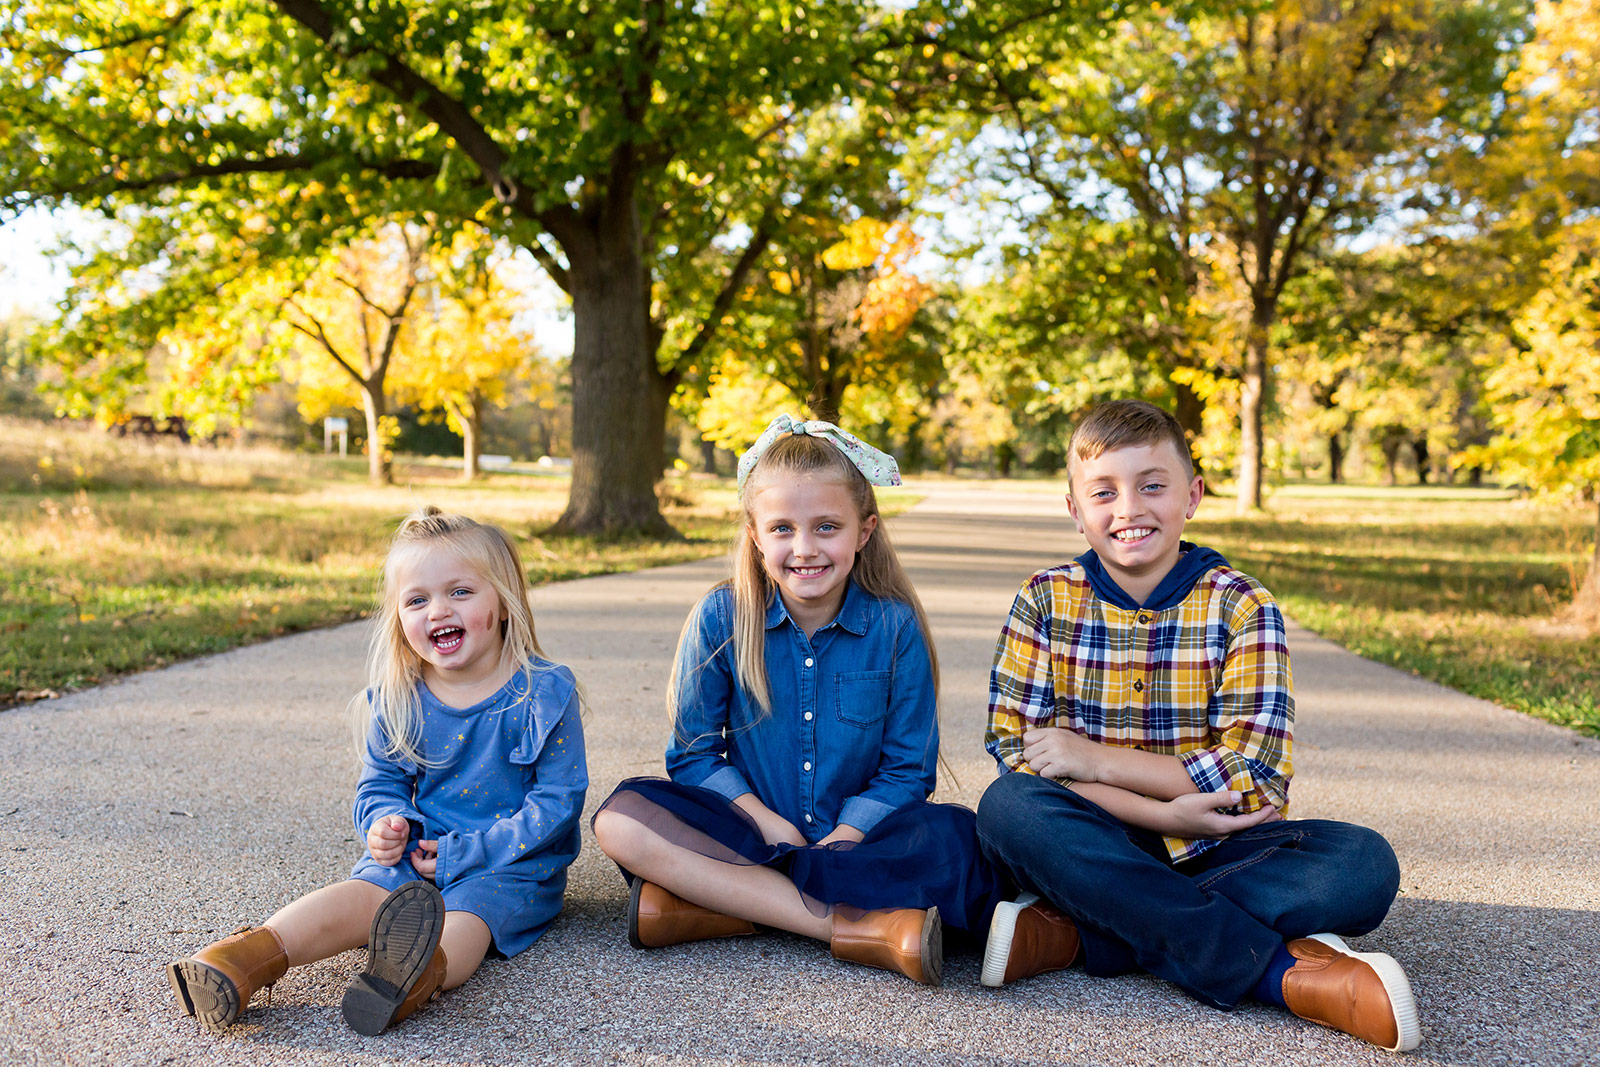 All three kids sit on the path in front of fall trees.